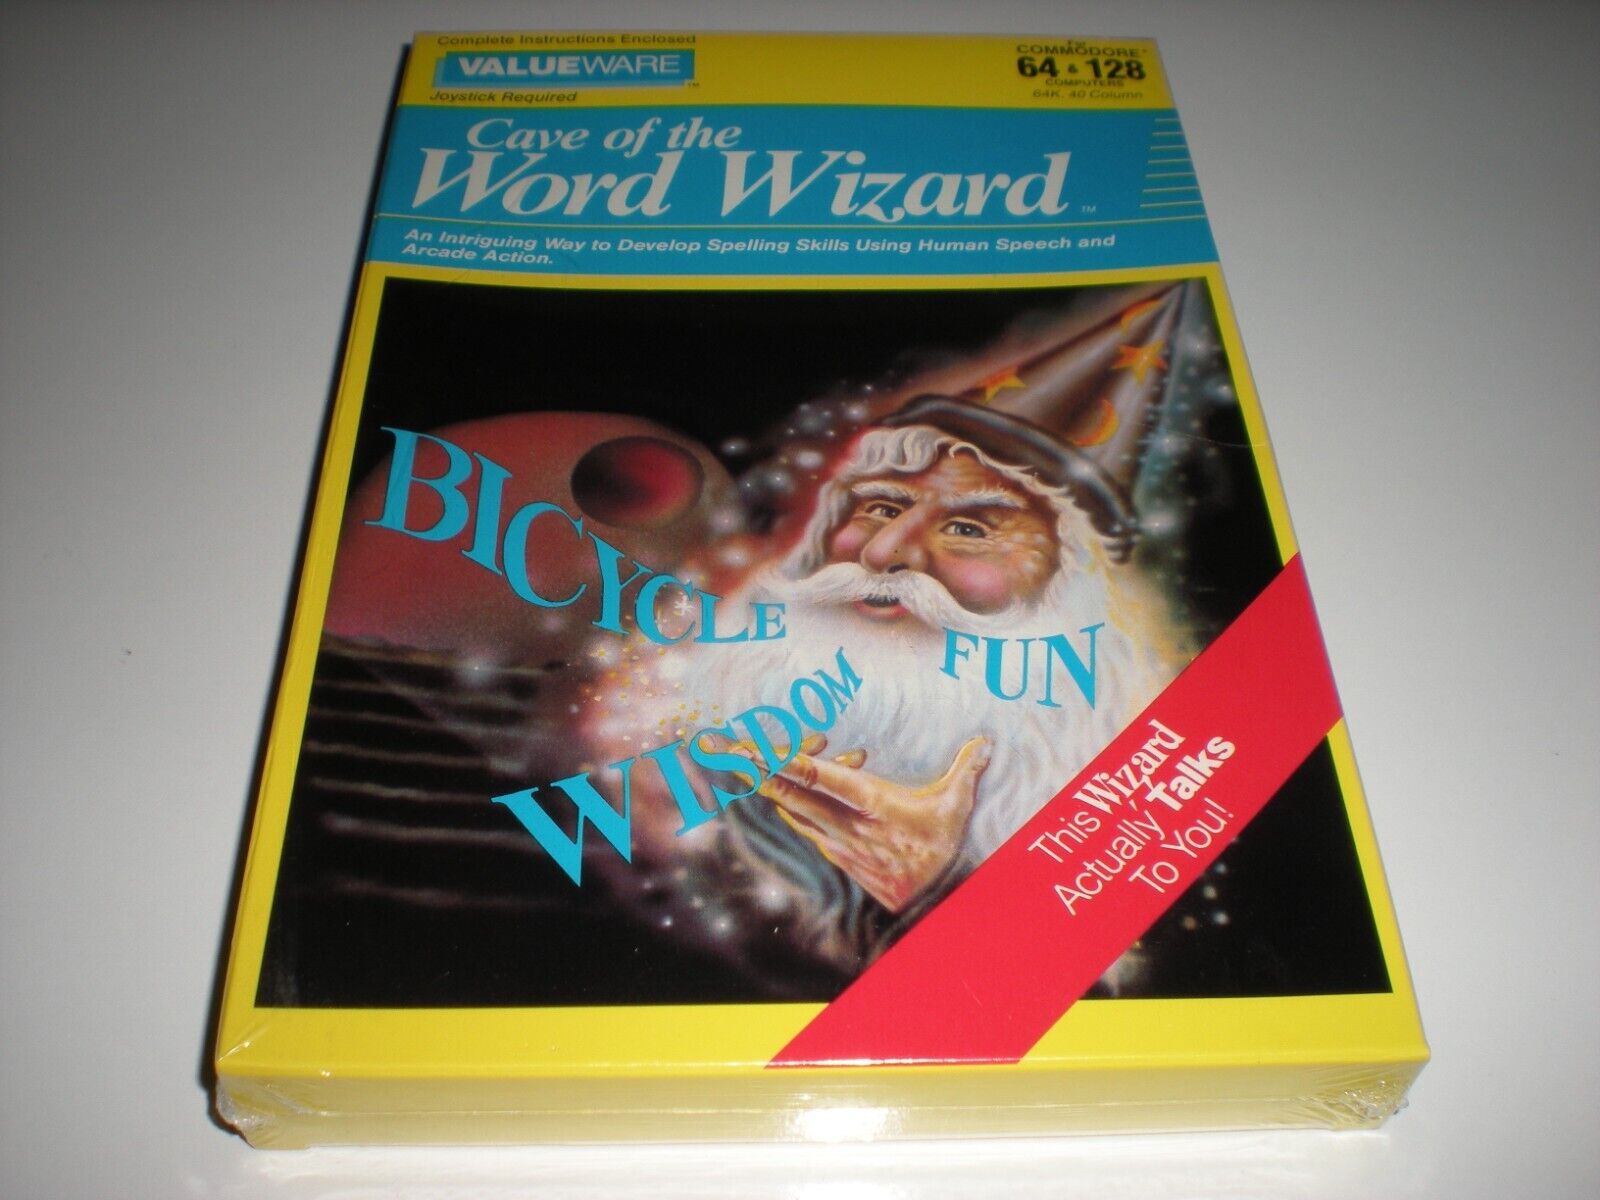 Cave of the Word Wizard spelling game for Commodore with speech Rare. Unopened.